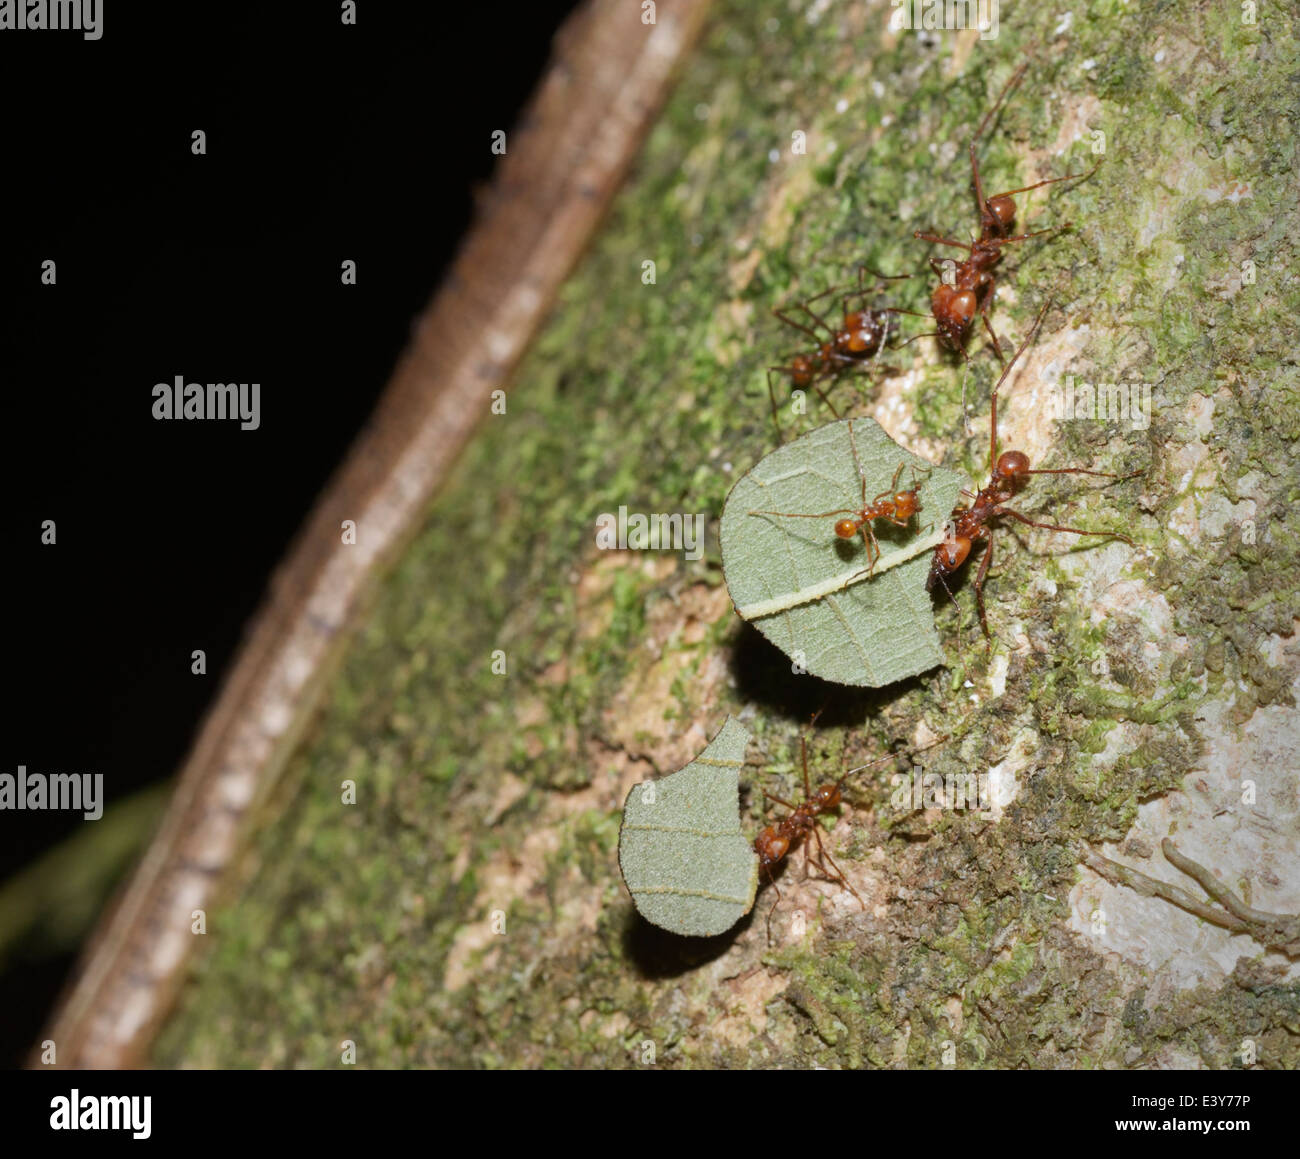 Leaf cutter ants, Atta sp., with members of different polymorphic castes of the colony - soldier, various types of workers Stock Photo